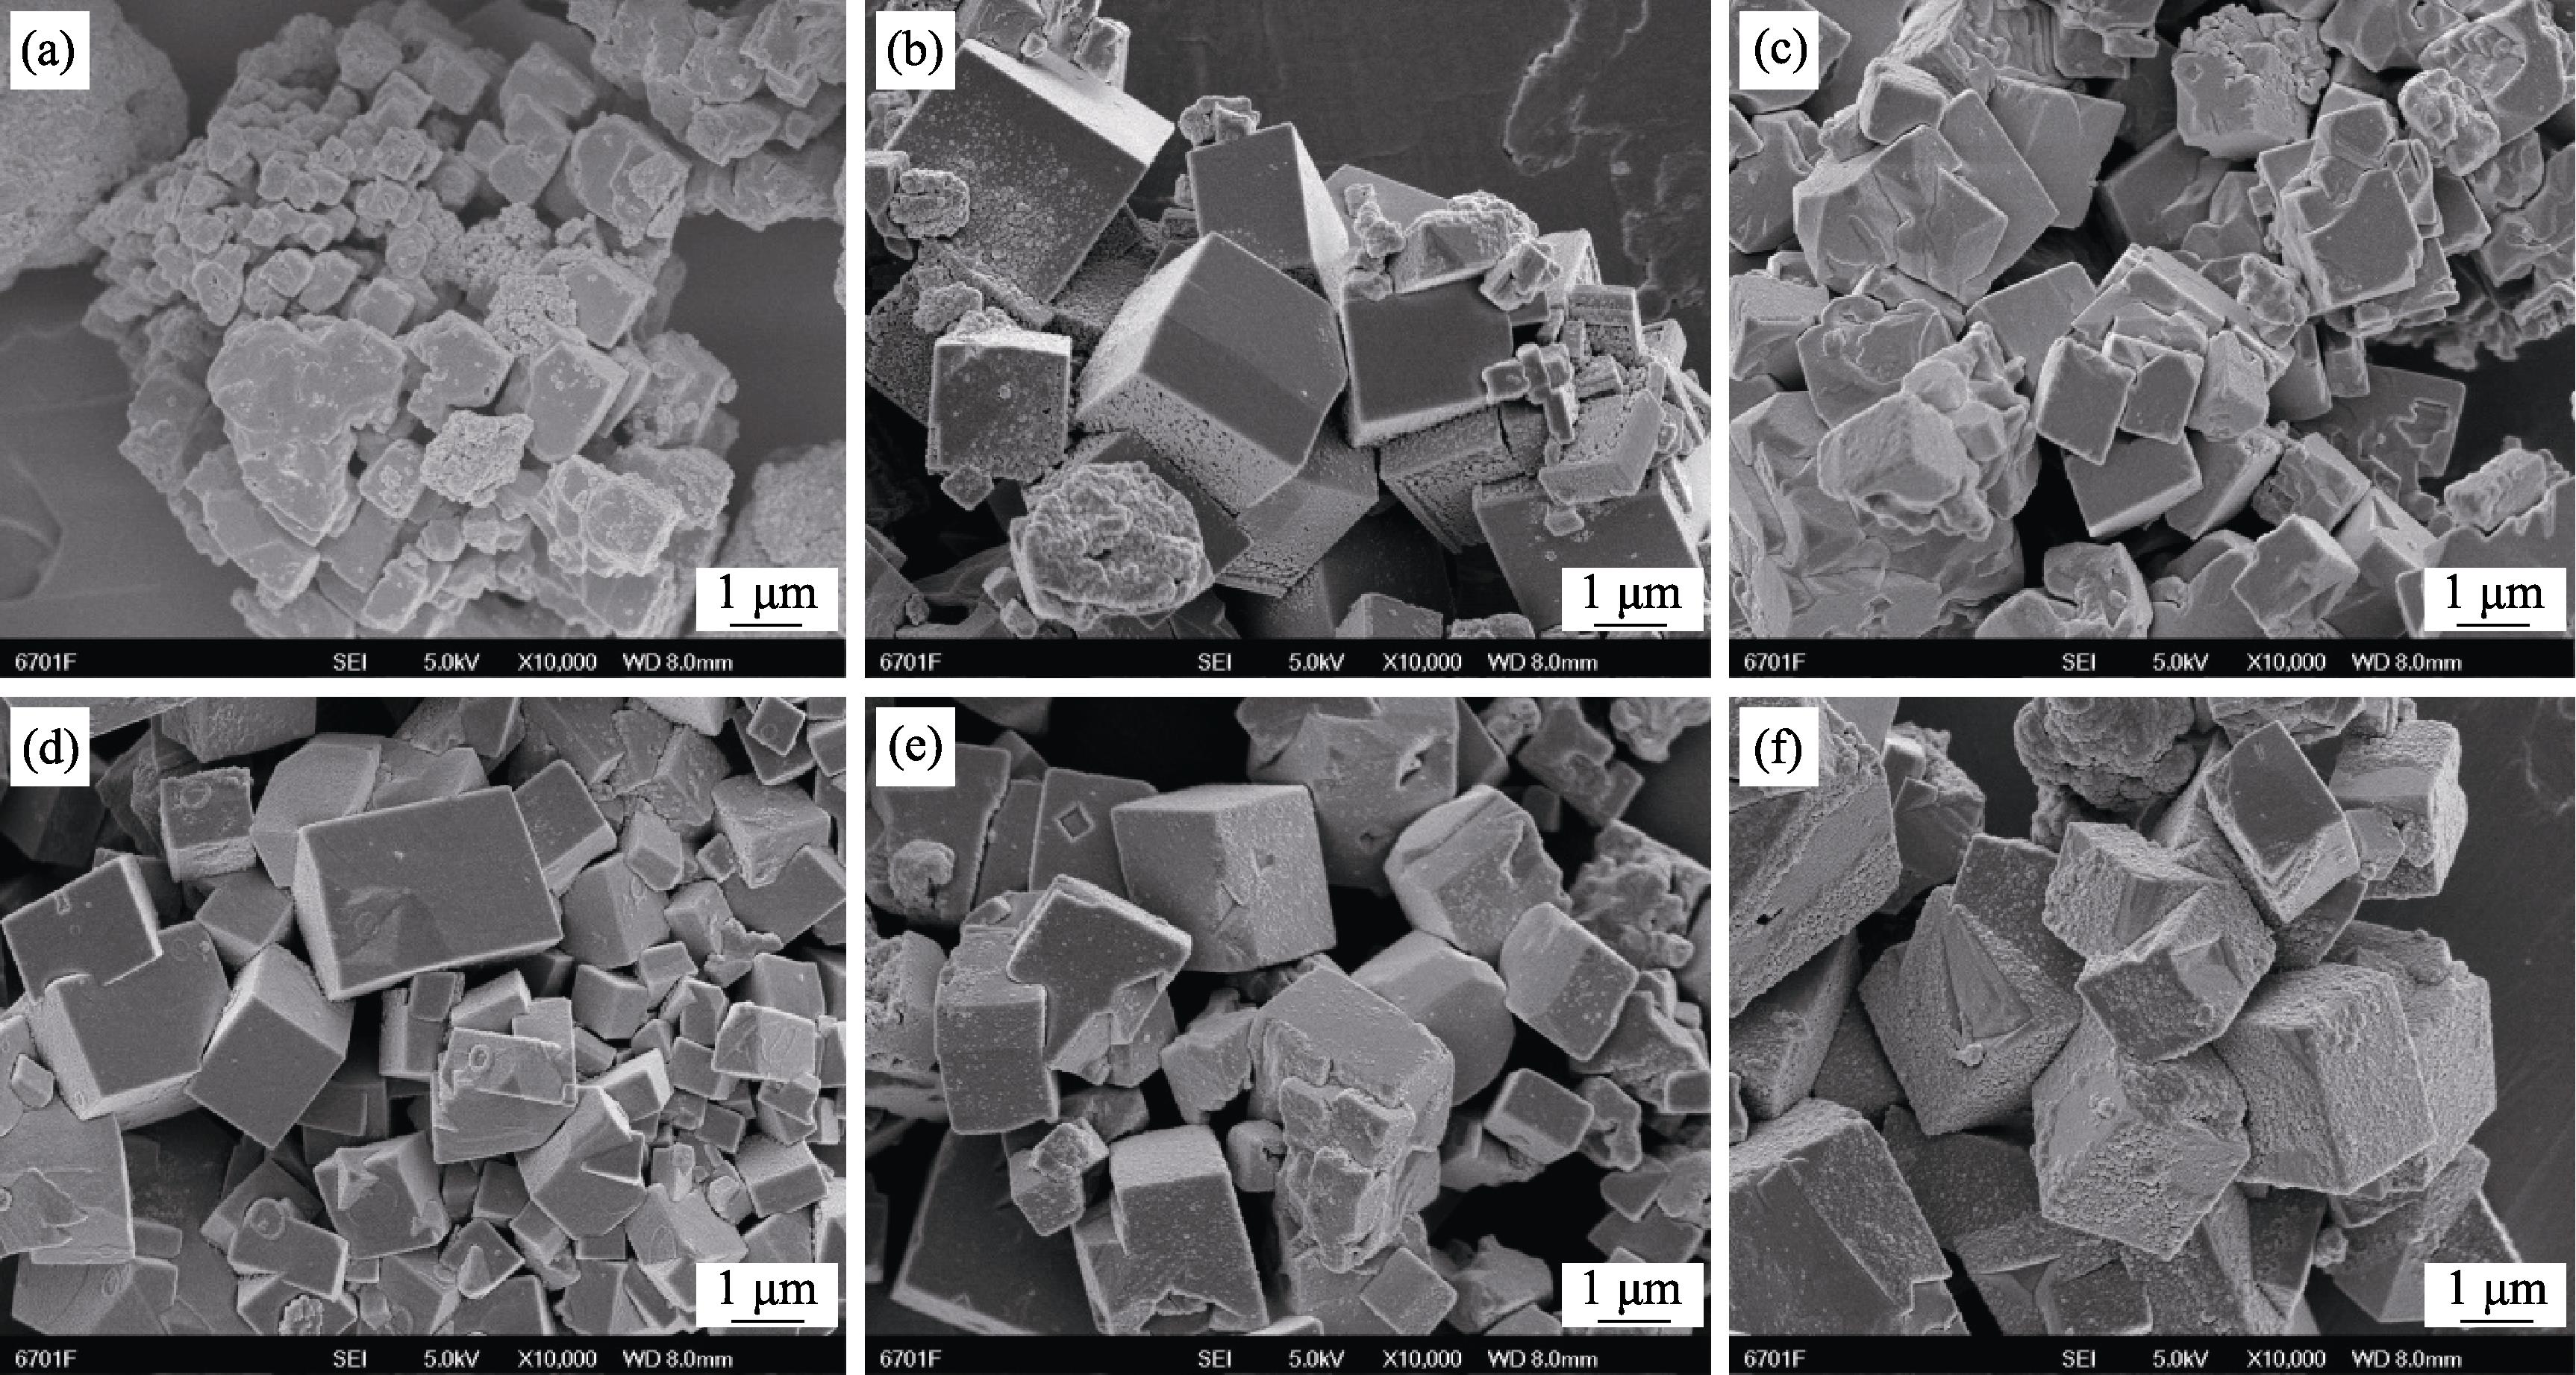 SEM images of samples in the presence of various types of seeds (a) SP34; (b) SP34-RS; (c) SP34-AS0.1; (d) SP34-AS0.01; (e) SP34-AS0.001; (f) SP34-AS0.0001